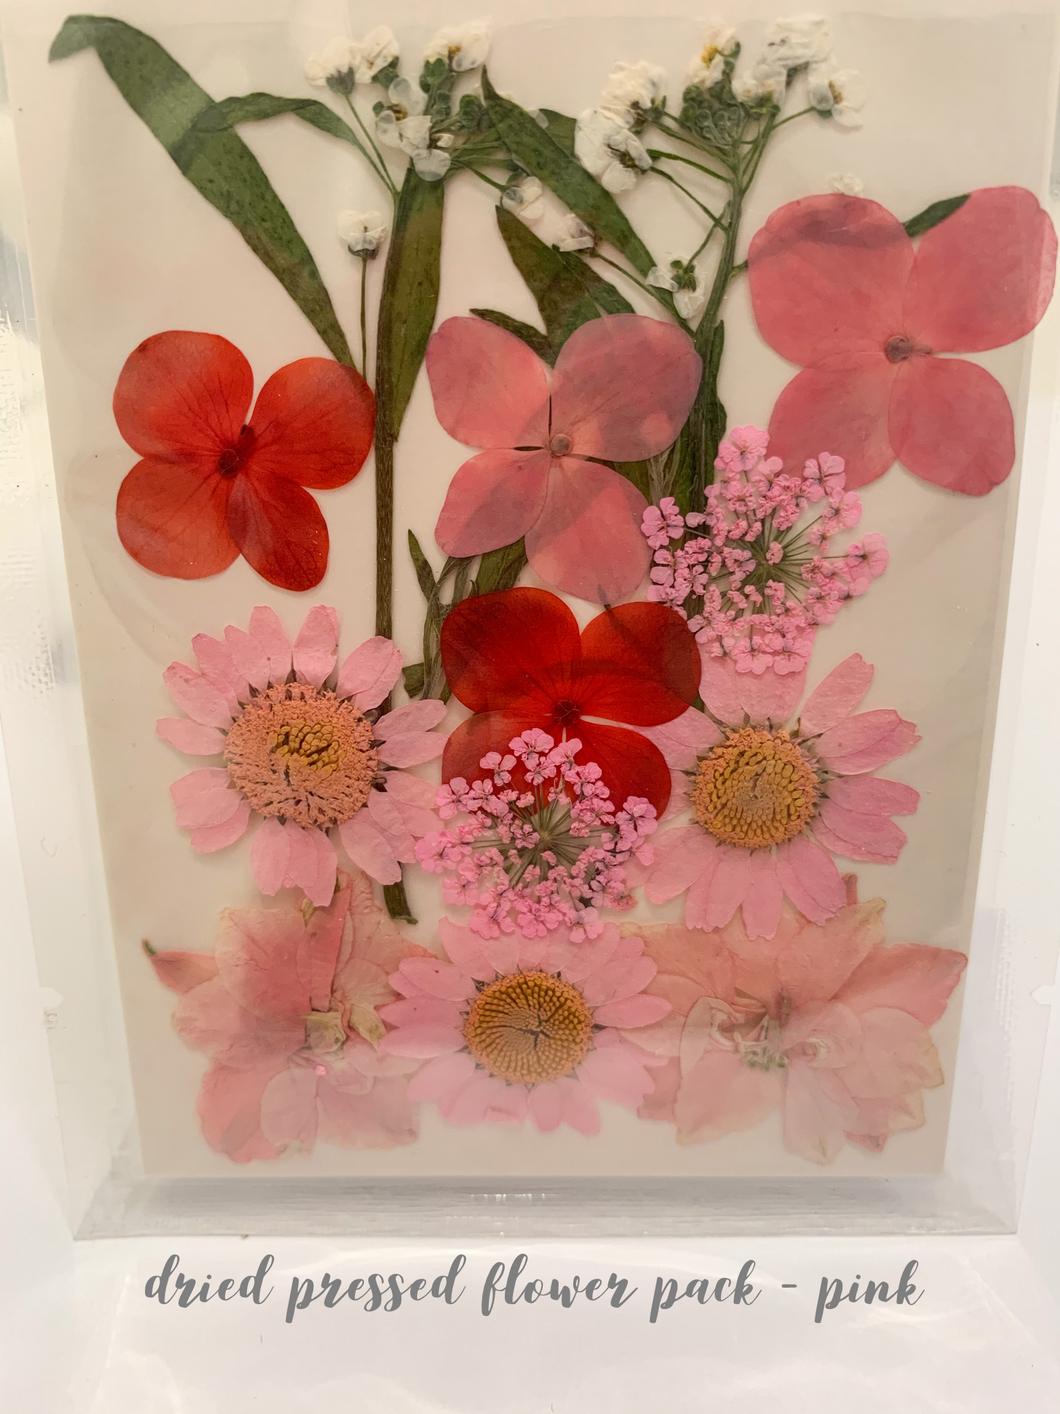 Small Dried Pressed Flower Pack - Pink